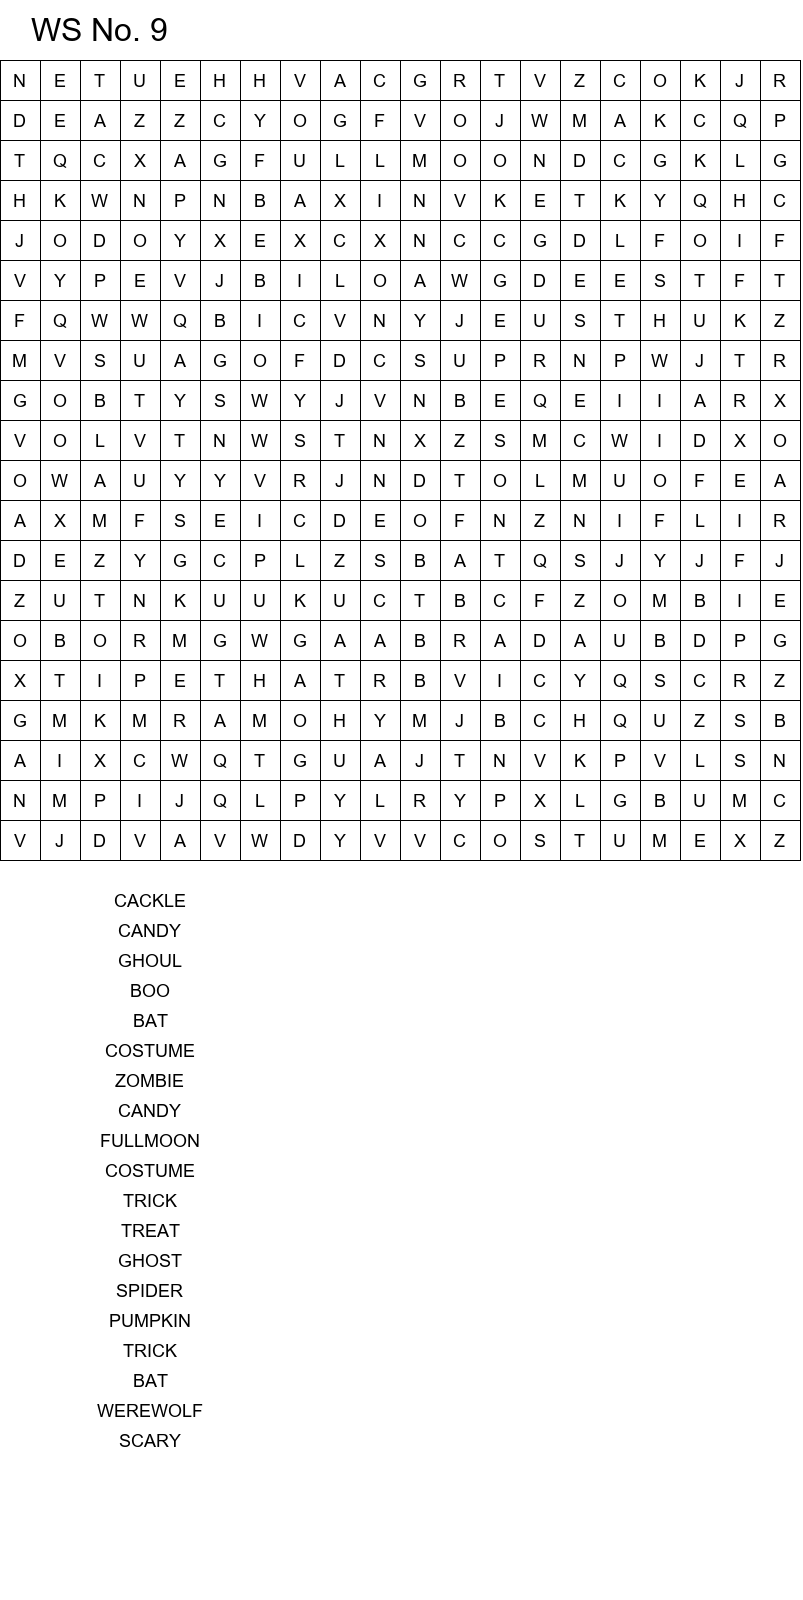 Free online Halloween word search puzzles size 20x20 No 9